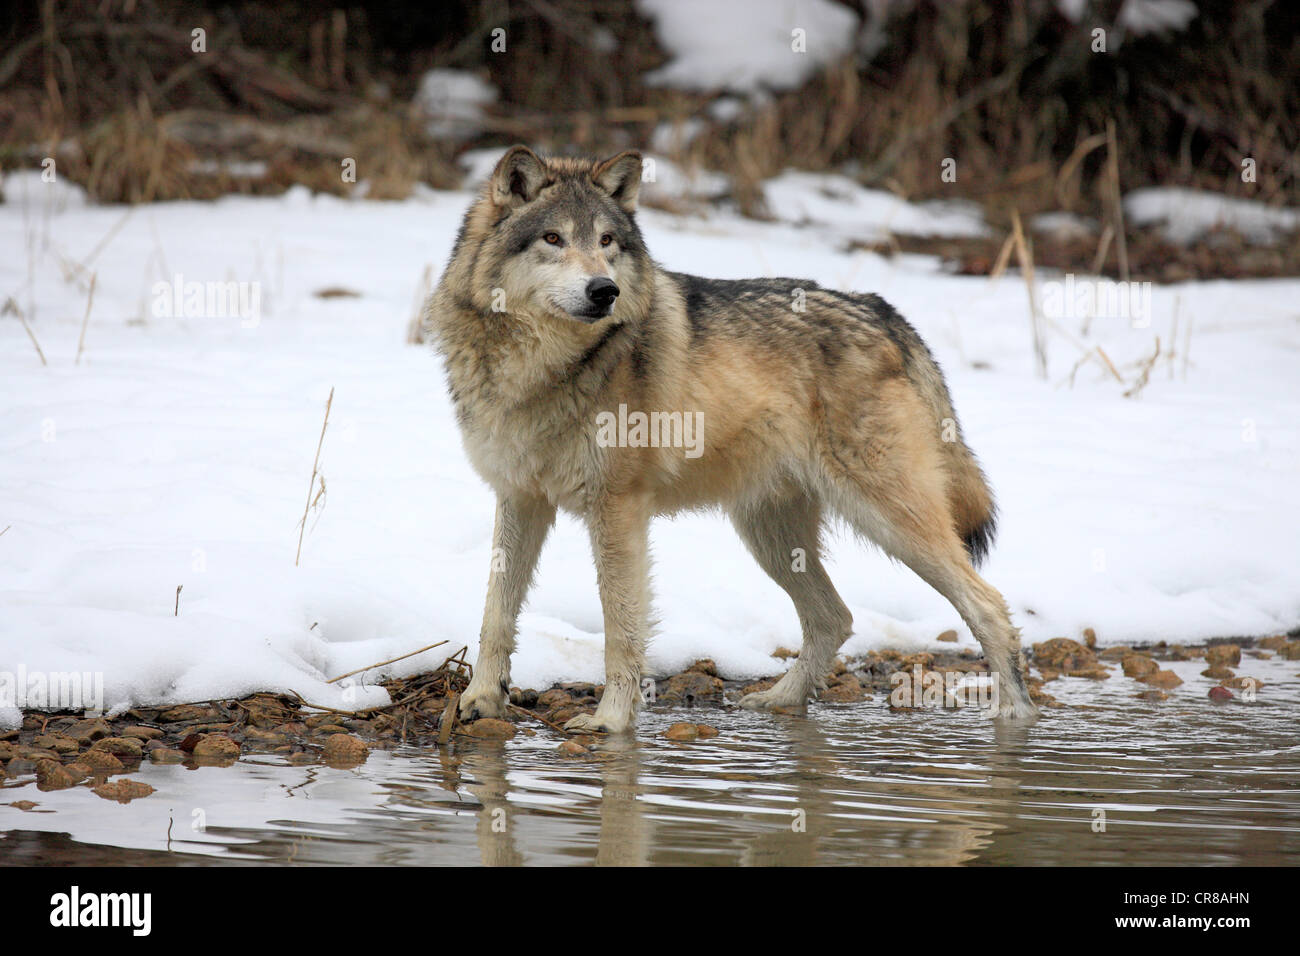 Wolf (Canis lupus), at water, winter, snow, Montana, USA Stock Photo